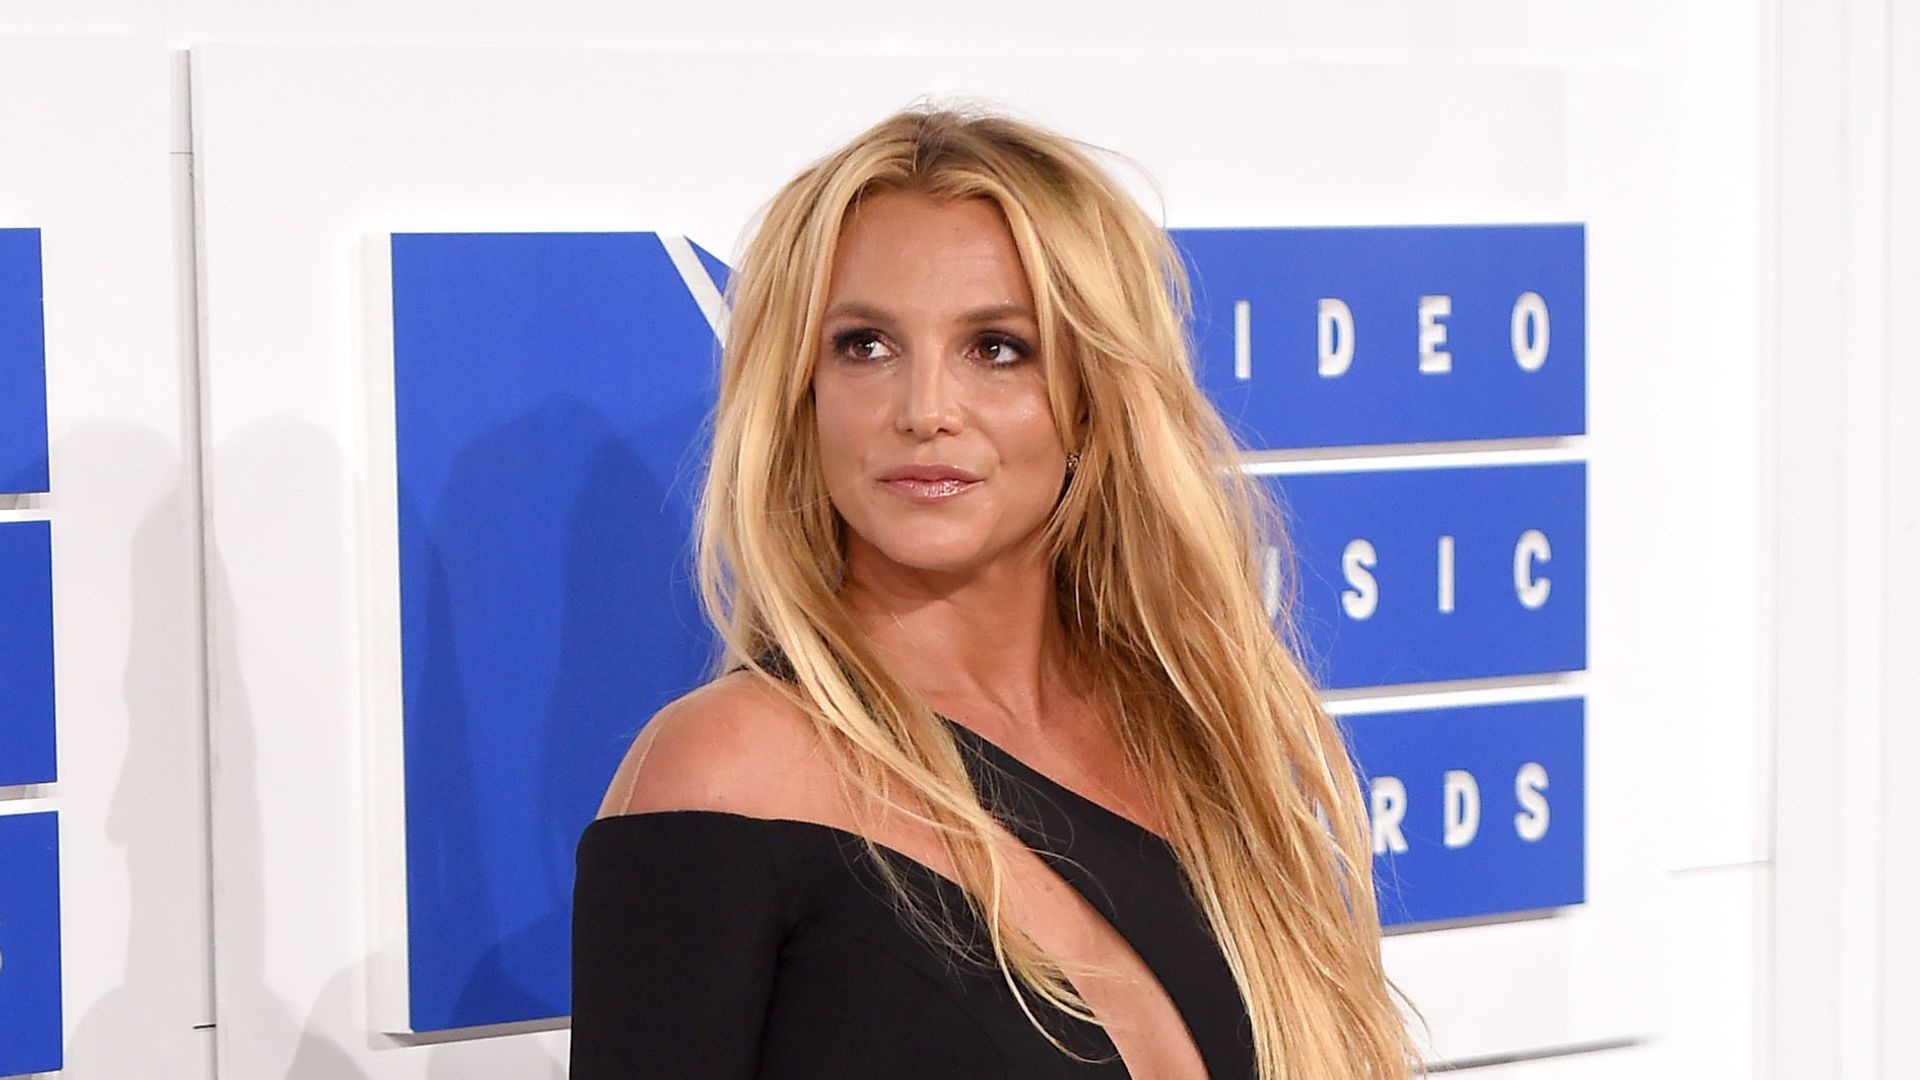 Britney Spears attends the 2016 MTV Video Music Awards at Madison Square Garden on August 28, 2016 in New York City